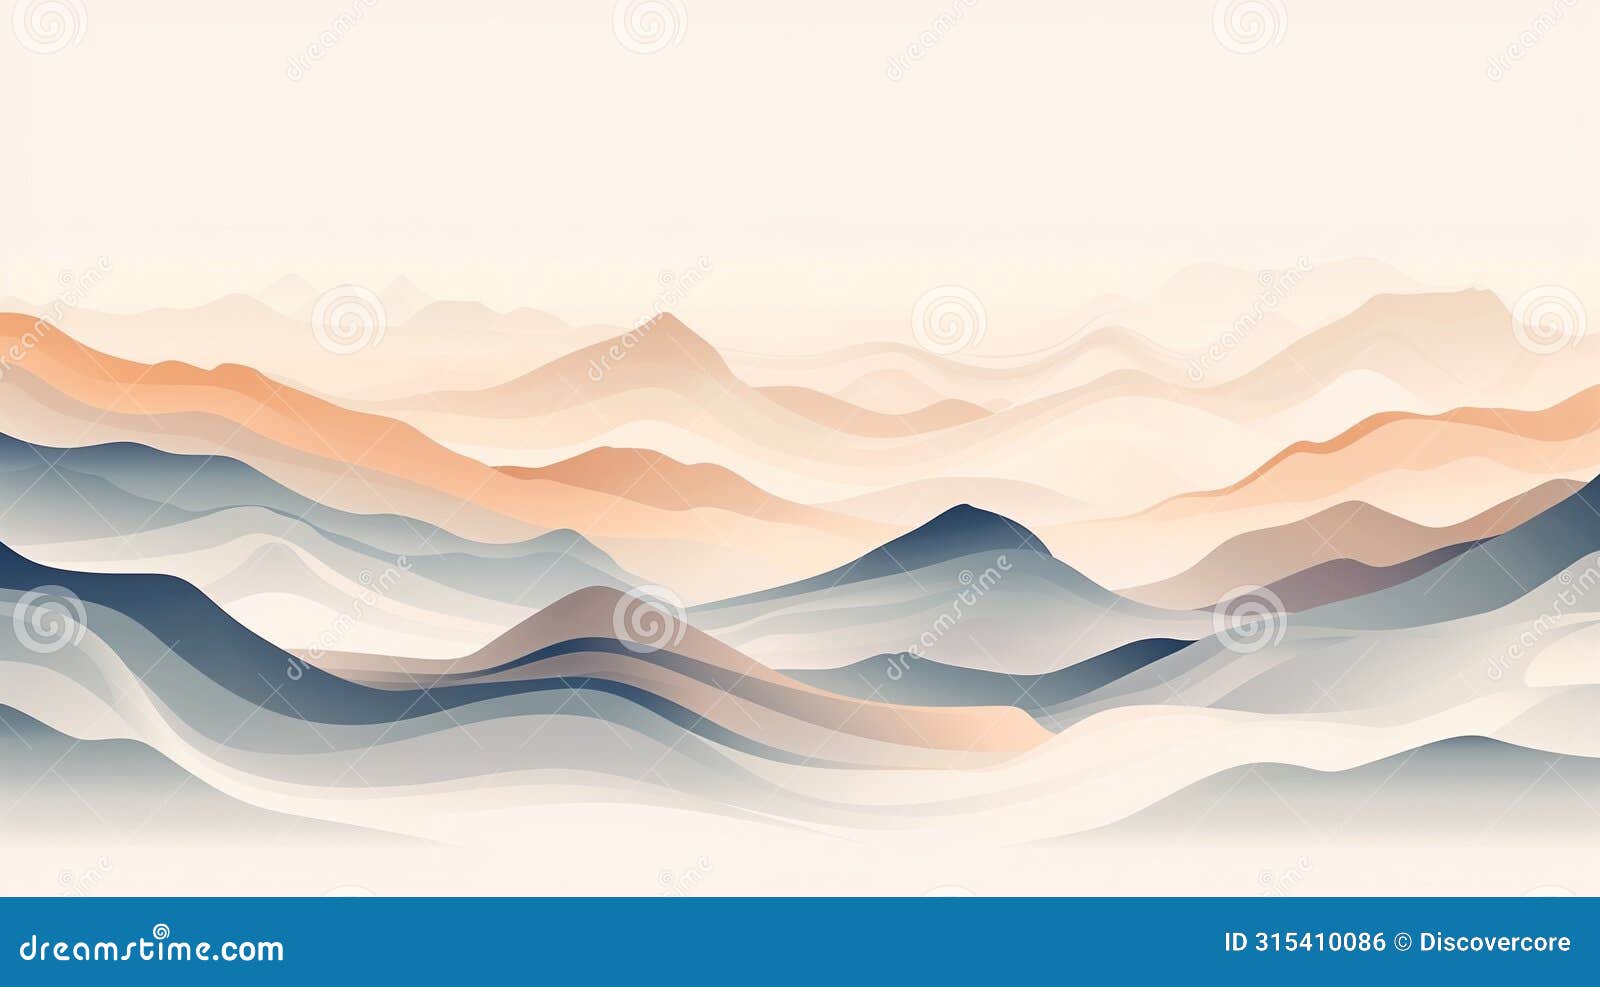 abstract mountain landscape in earth tones for serene backgrounds